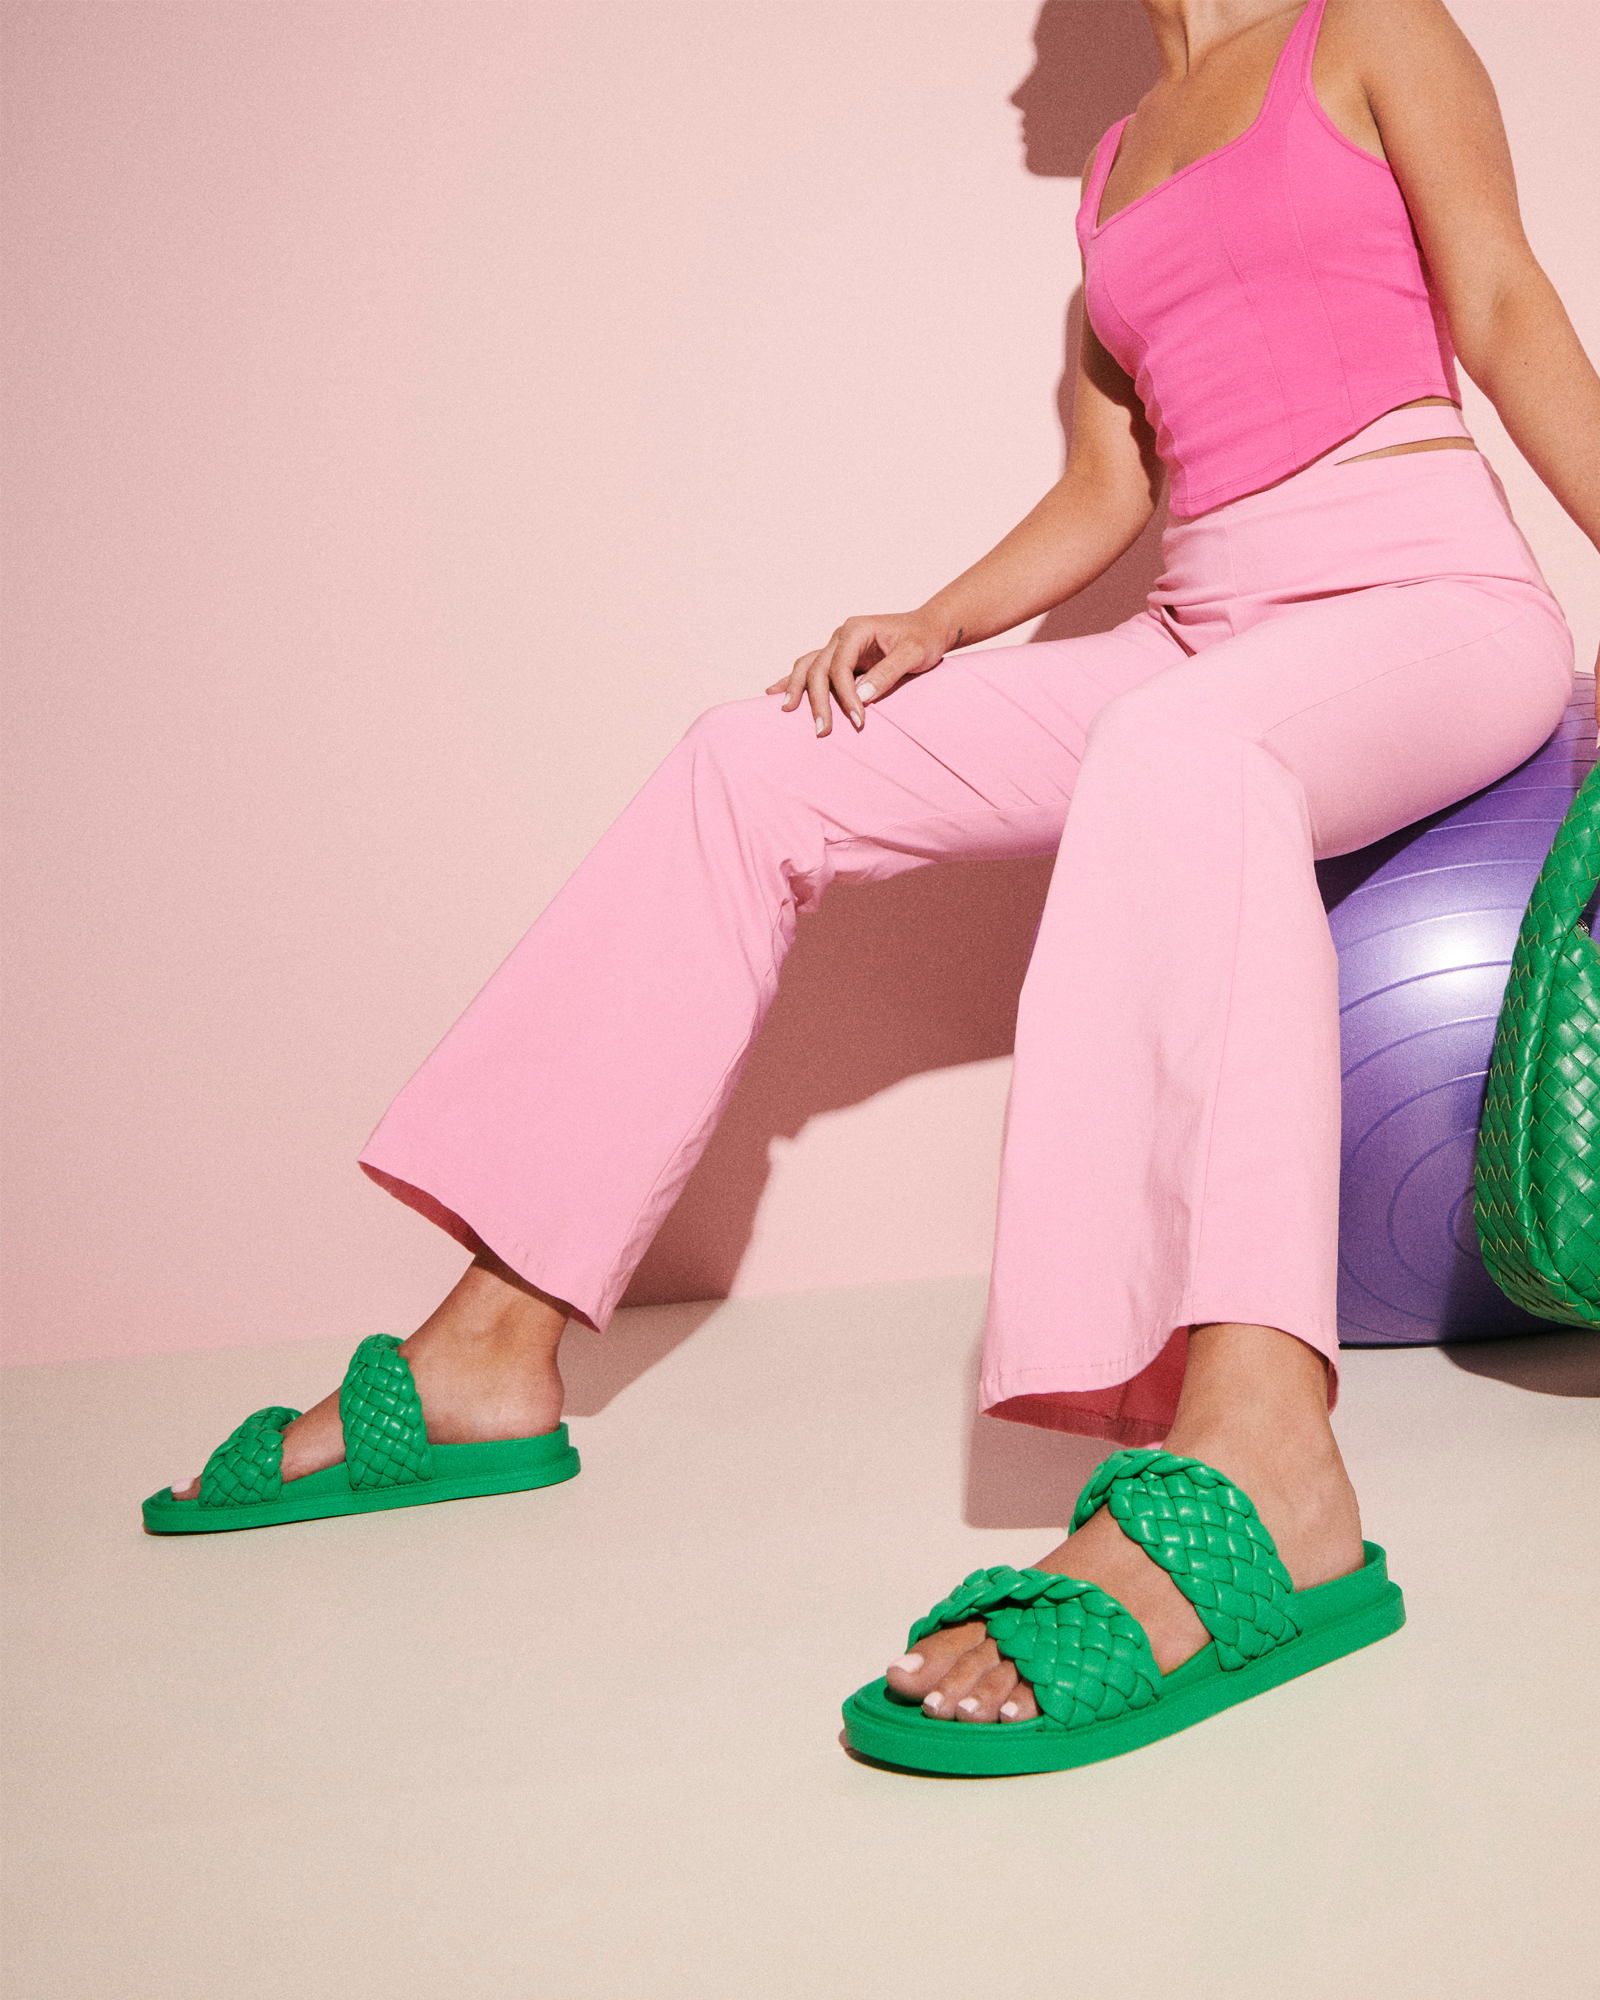 Therapy Shoes Evil Green | Women's Sandals | Slides | Flats | Woven